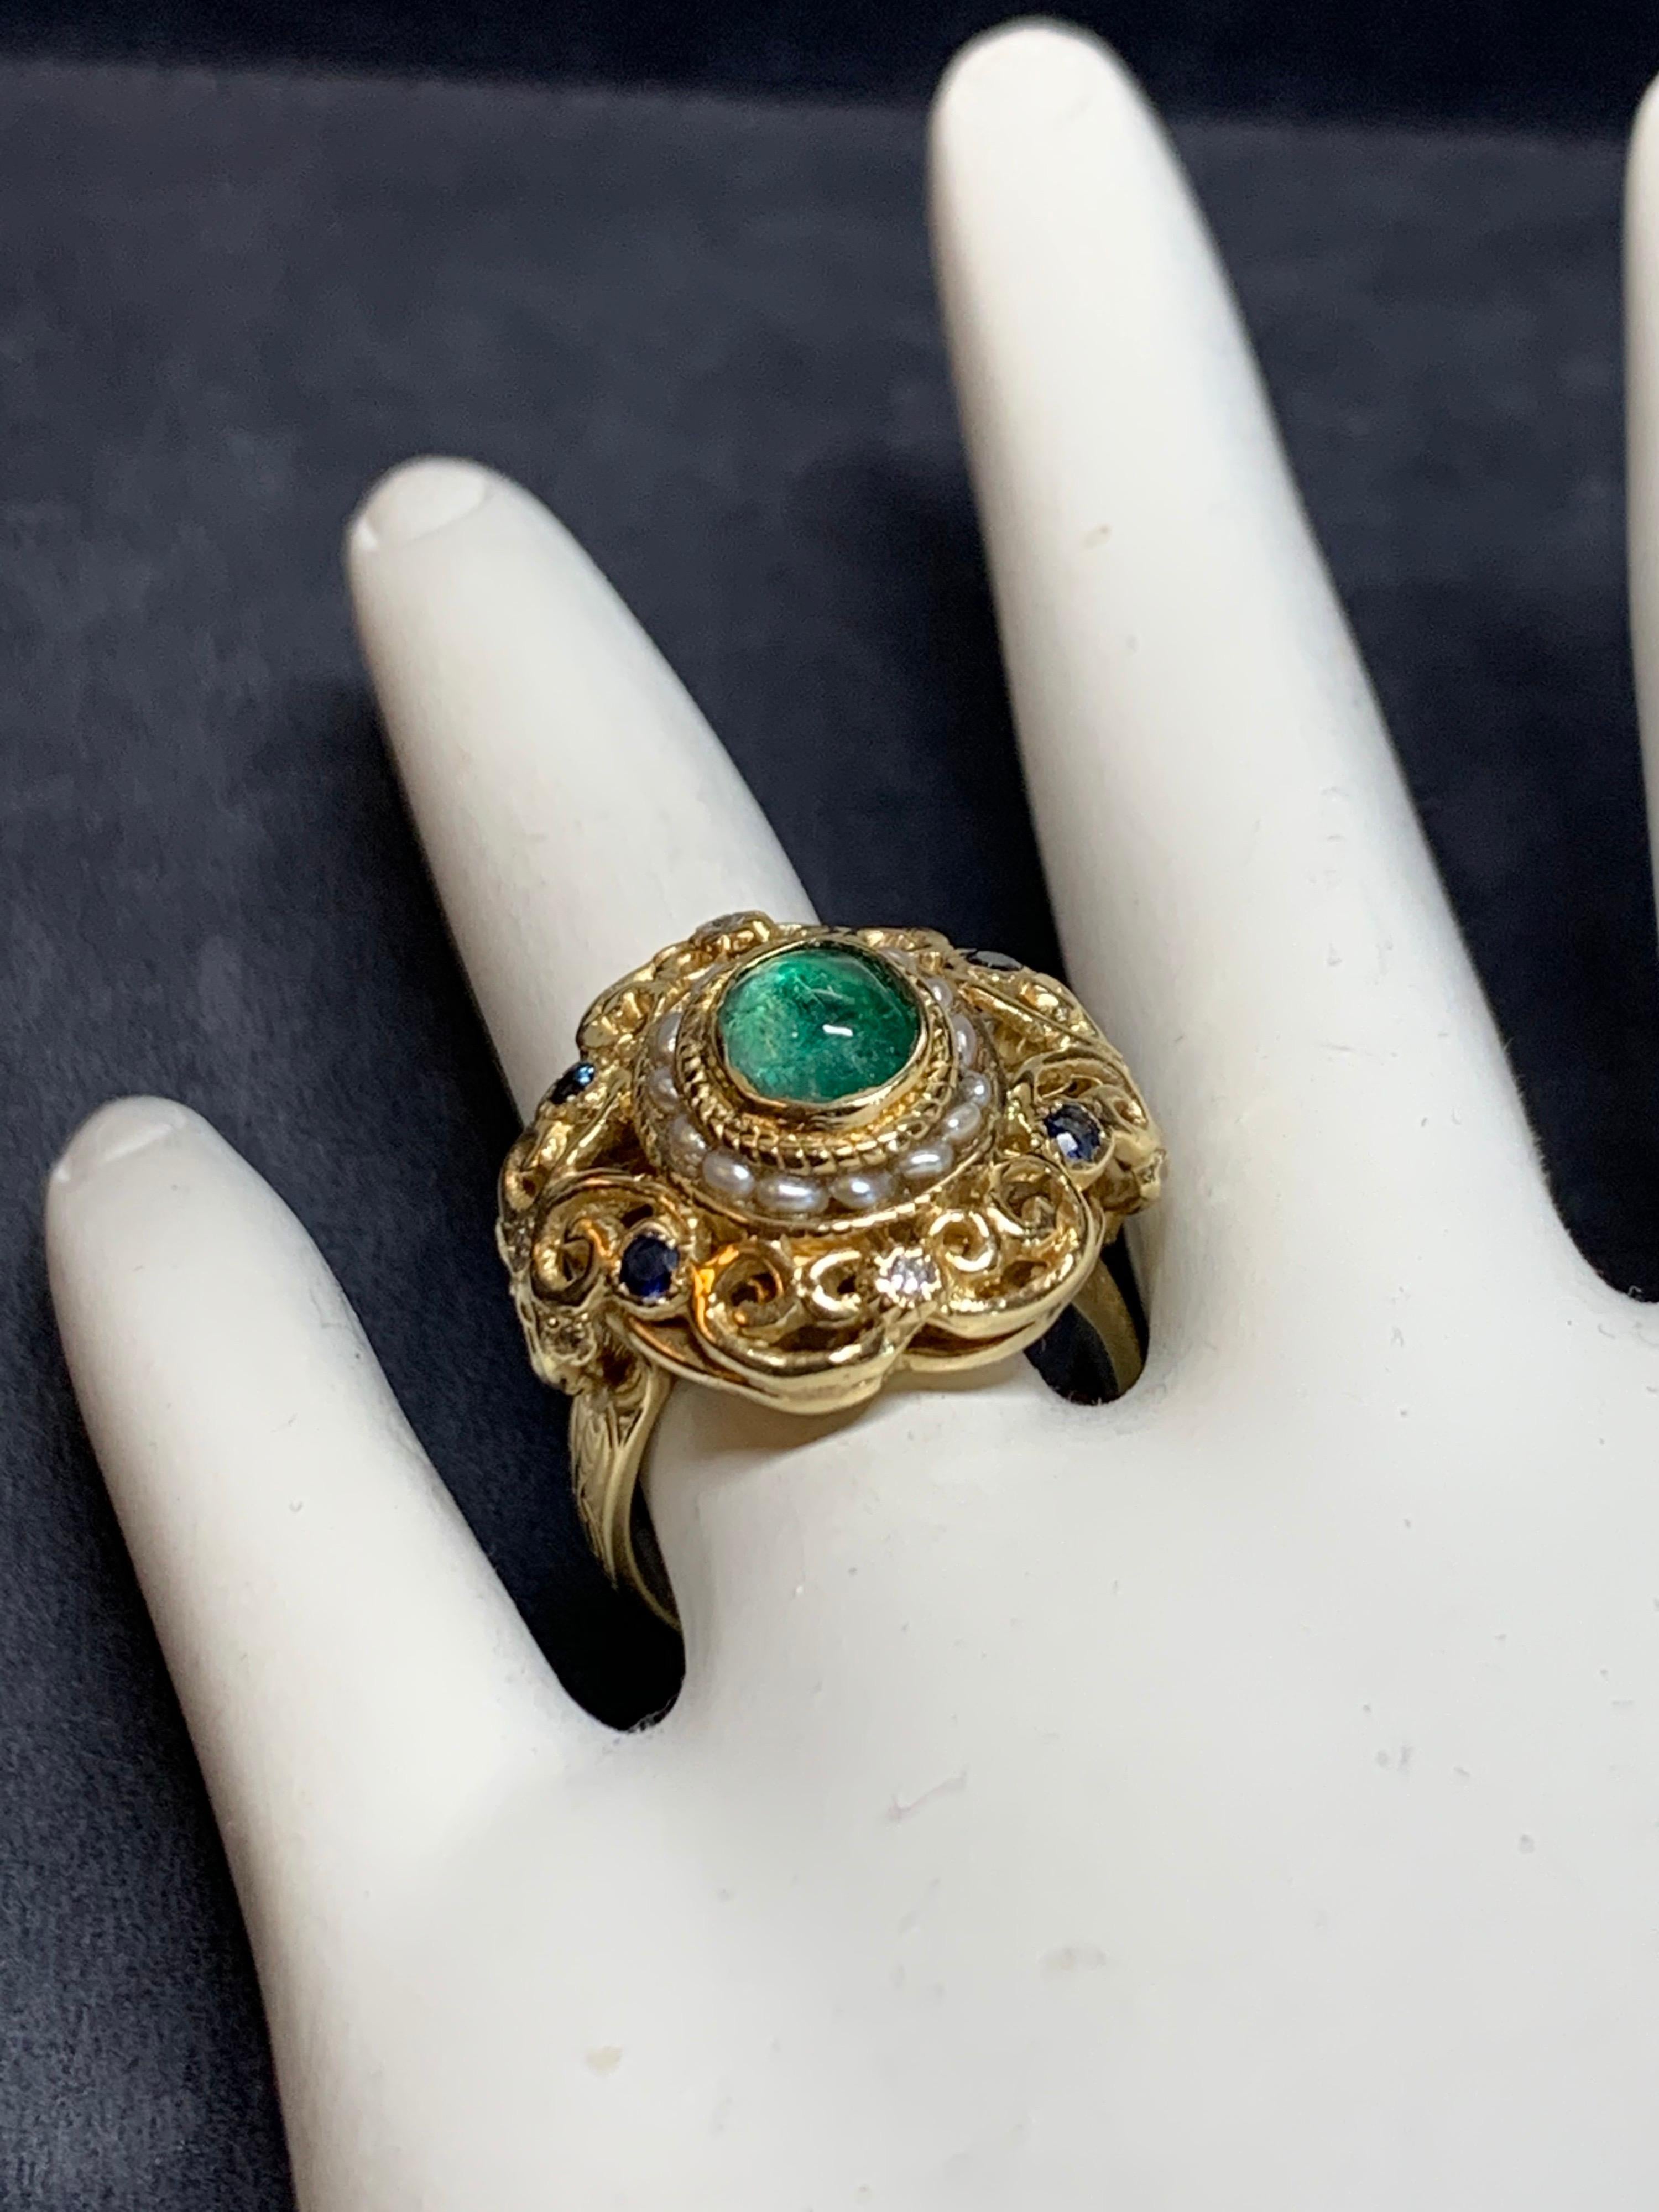 Retro Gold Cocktail Ring 2 Carat Natural Emerald Cab Sapphire Diamond circa 1950 In Good Condition For Sale In Los Angeles, CA